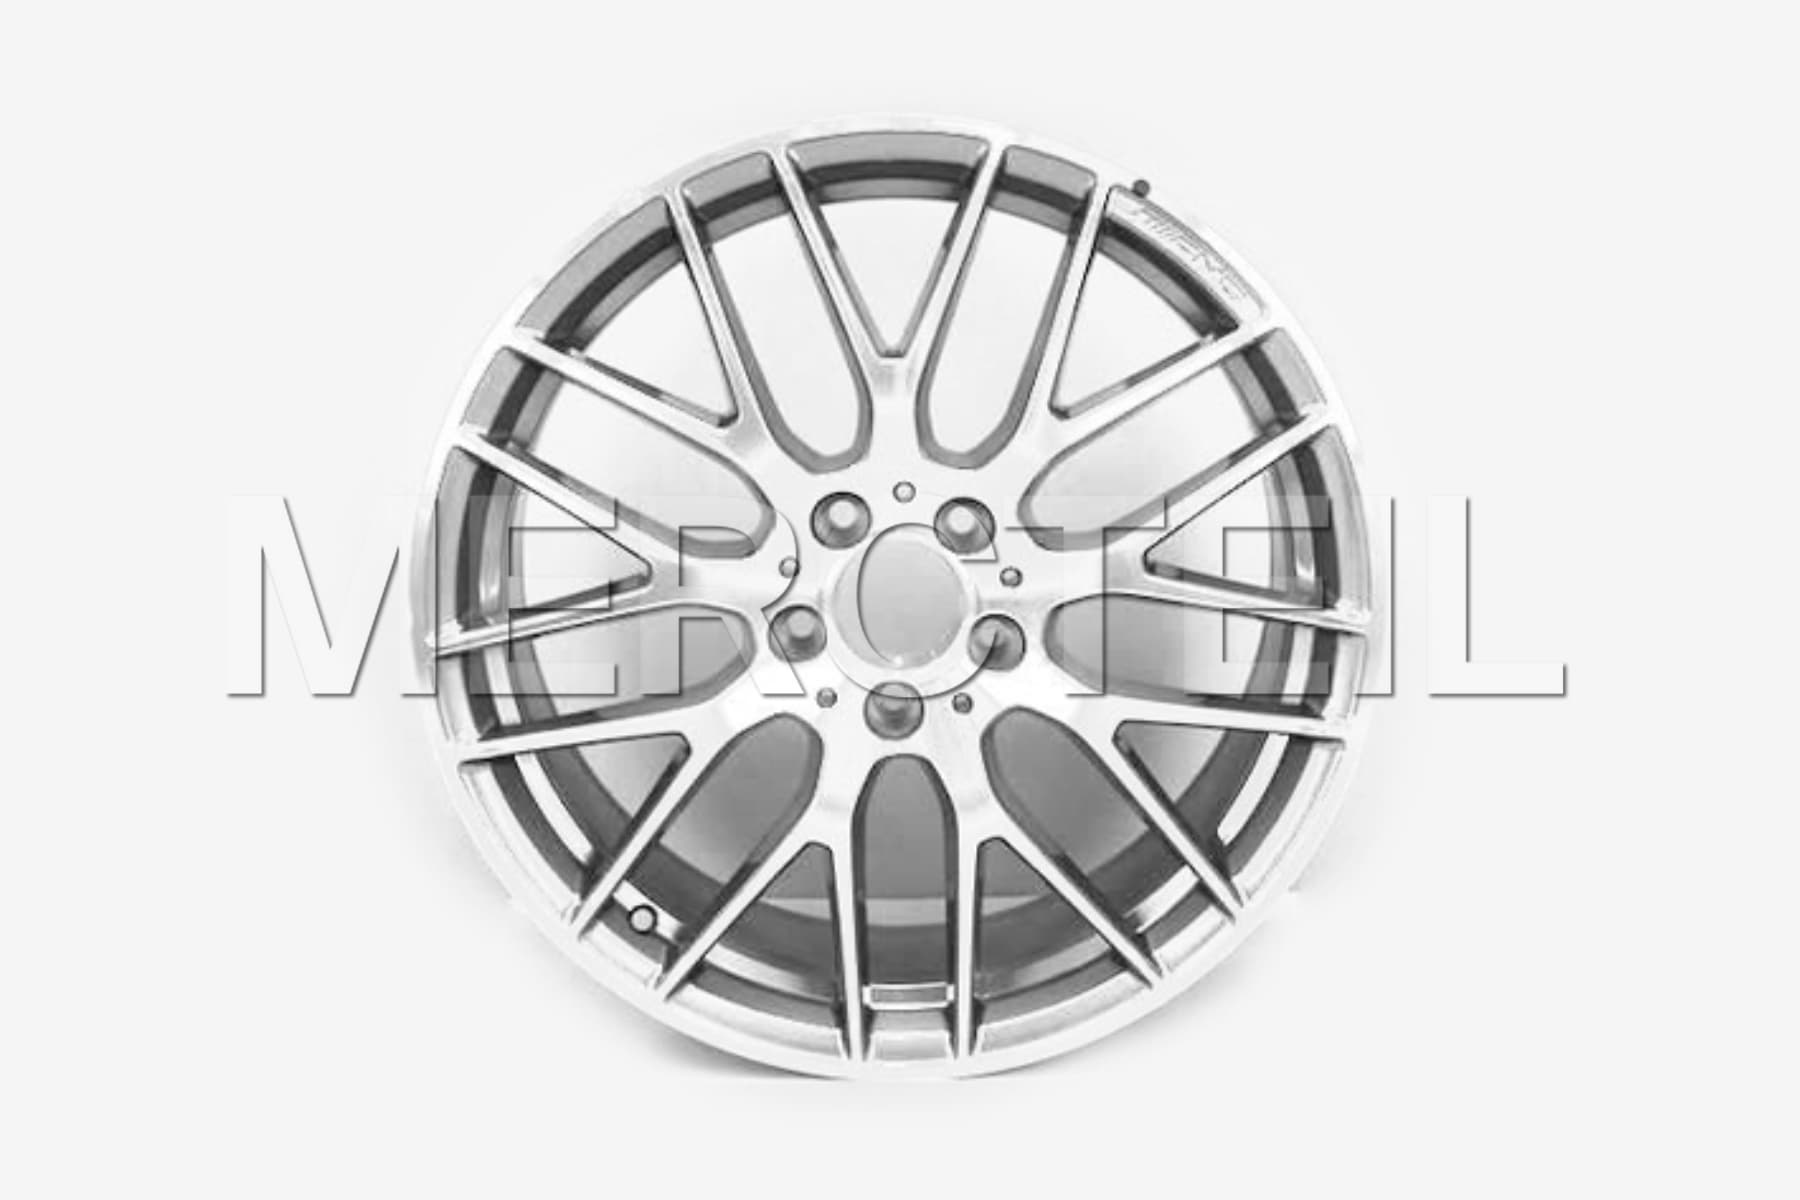 AMG 19 Inch Set Of Alloy Wheels for A-Class (part number: A17640109007X21)